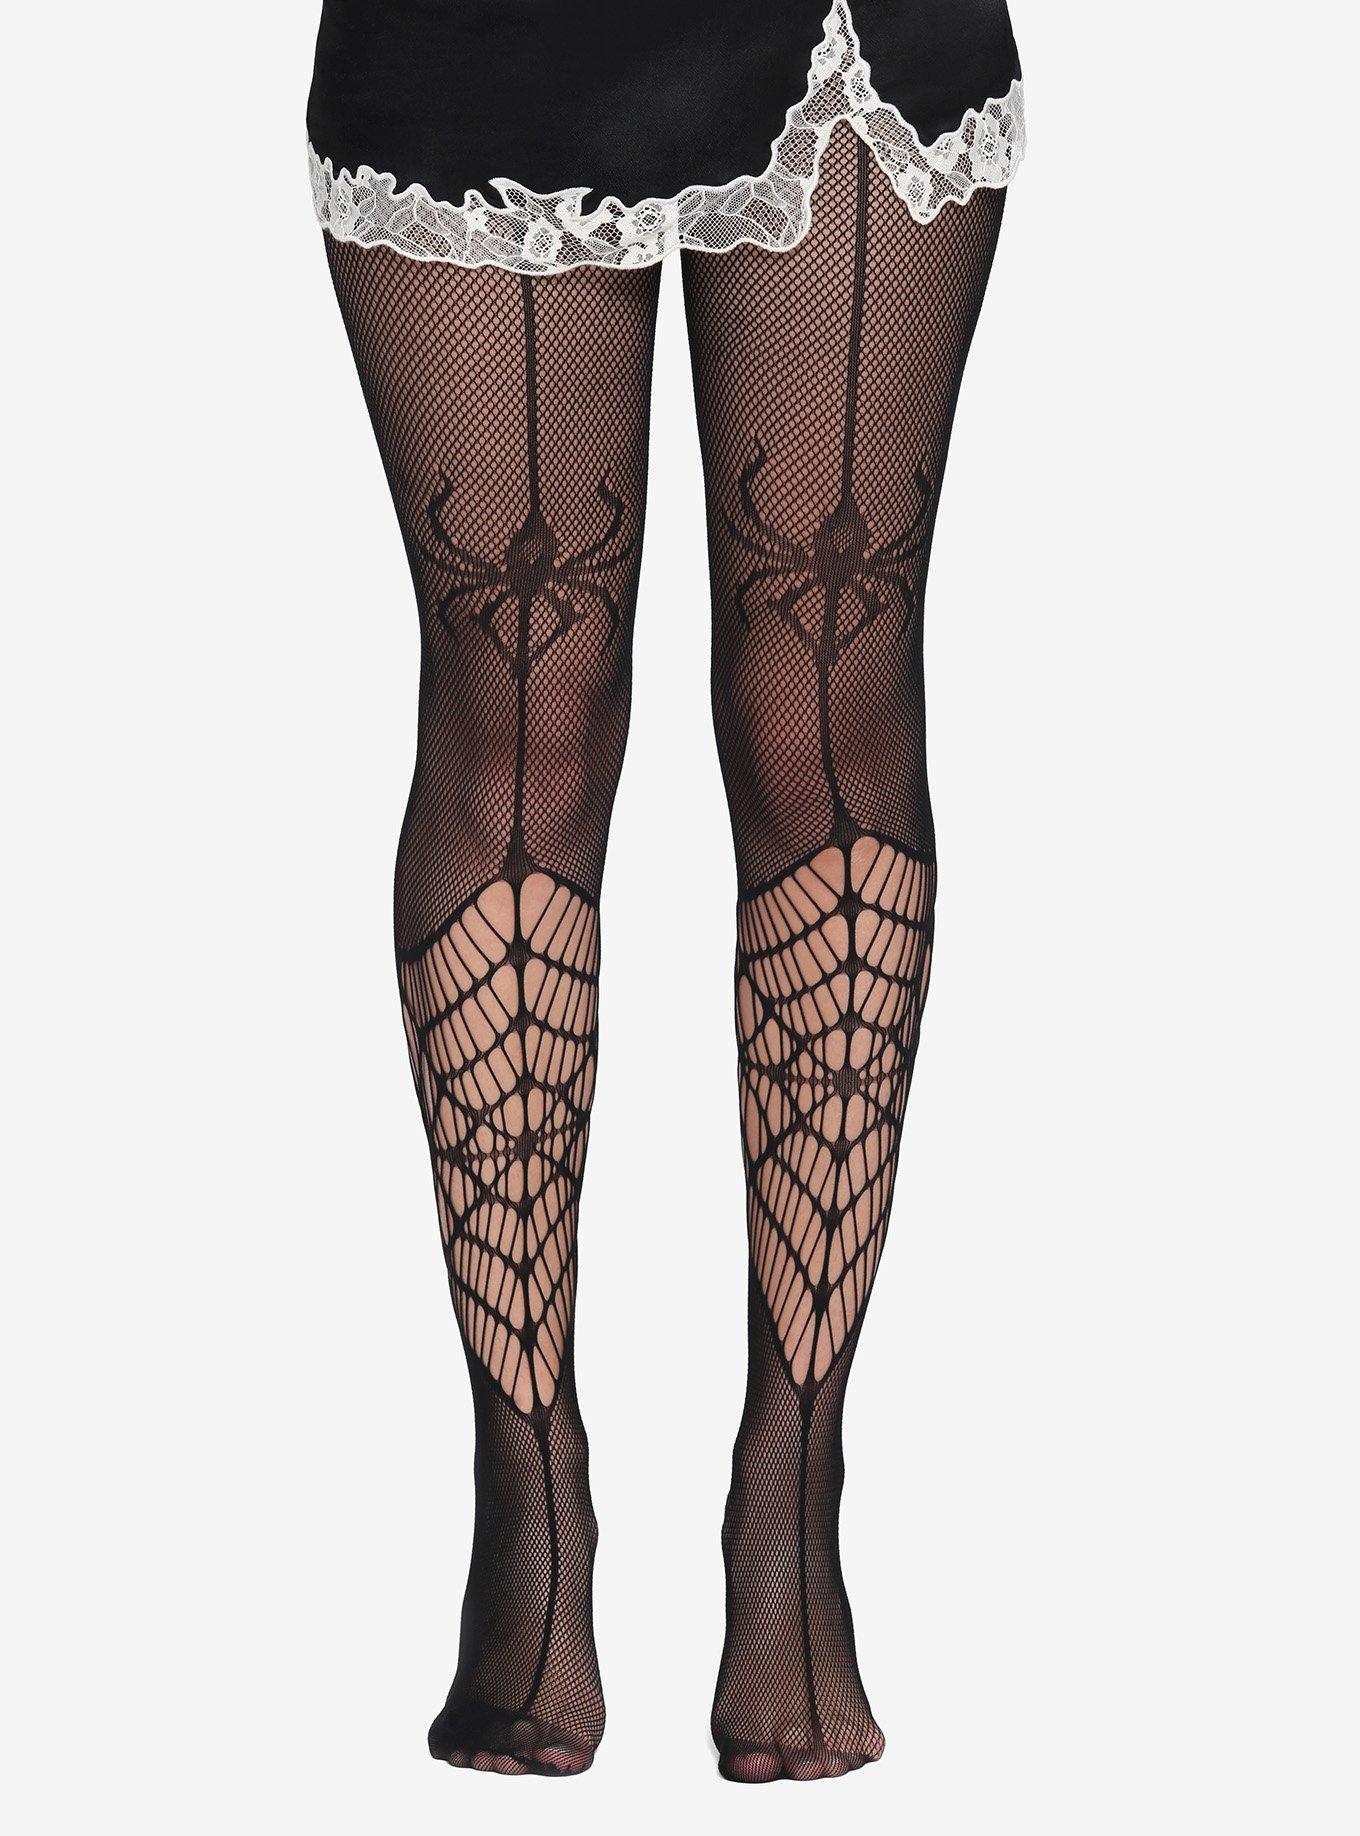 Hot Topic - Halloween is around the corner it's time for spooky tights!